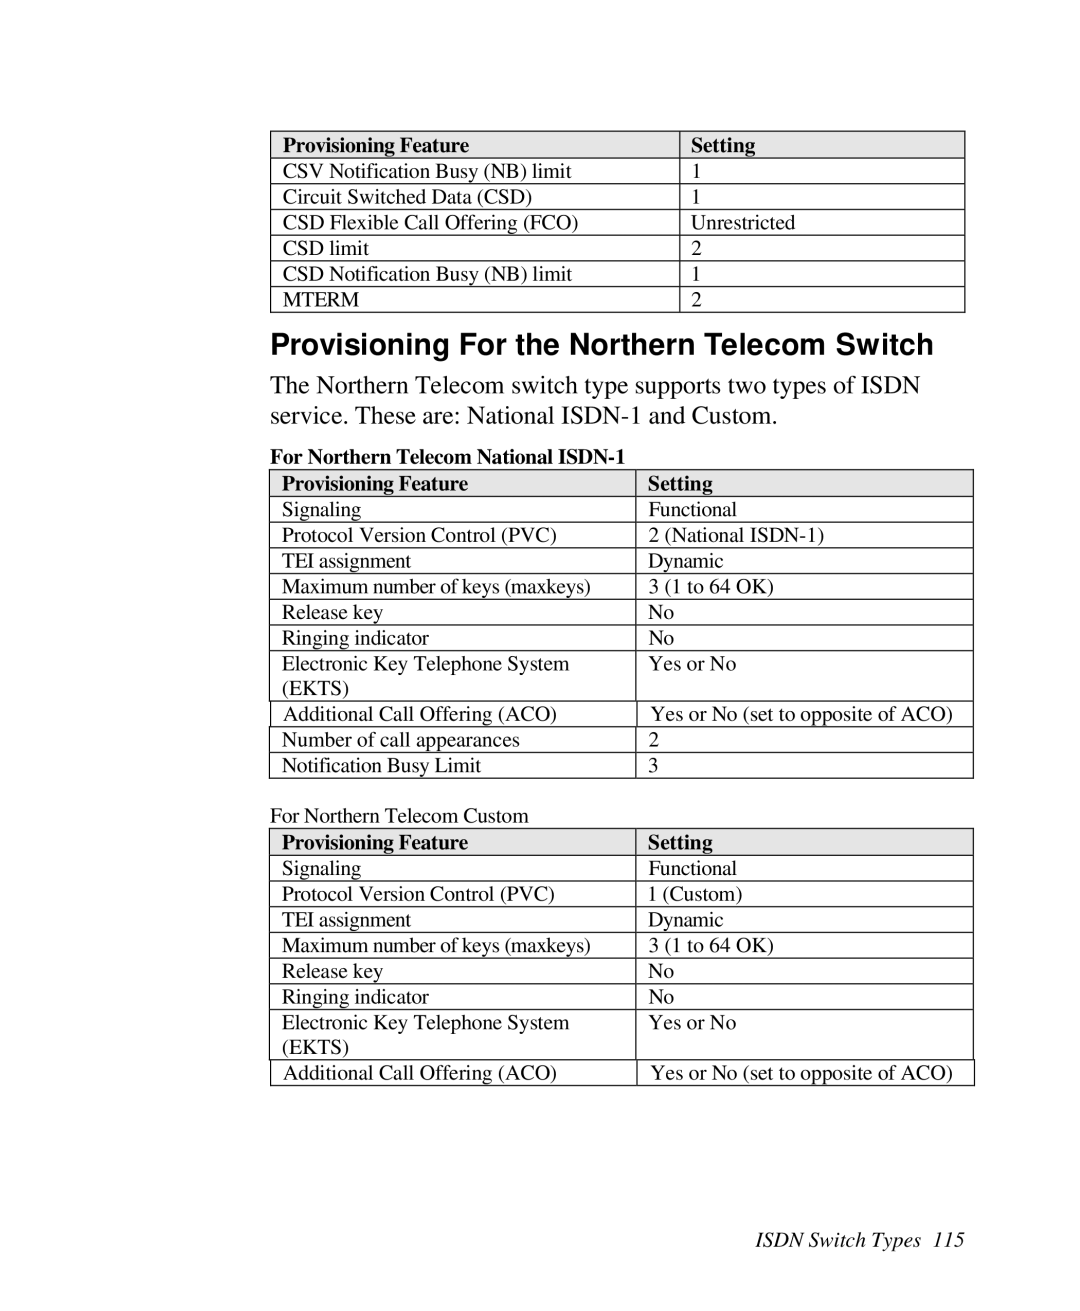 ZyXEL Communications Prestige100 user manual Provisioning For the Northern Telecom Switch, Provisioning Feature, Setting 